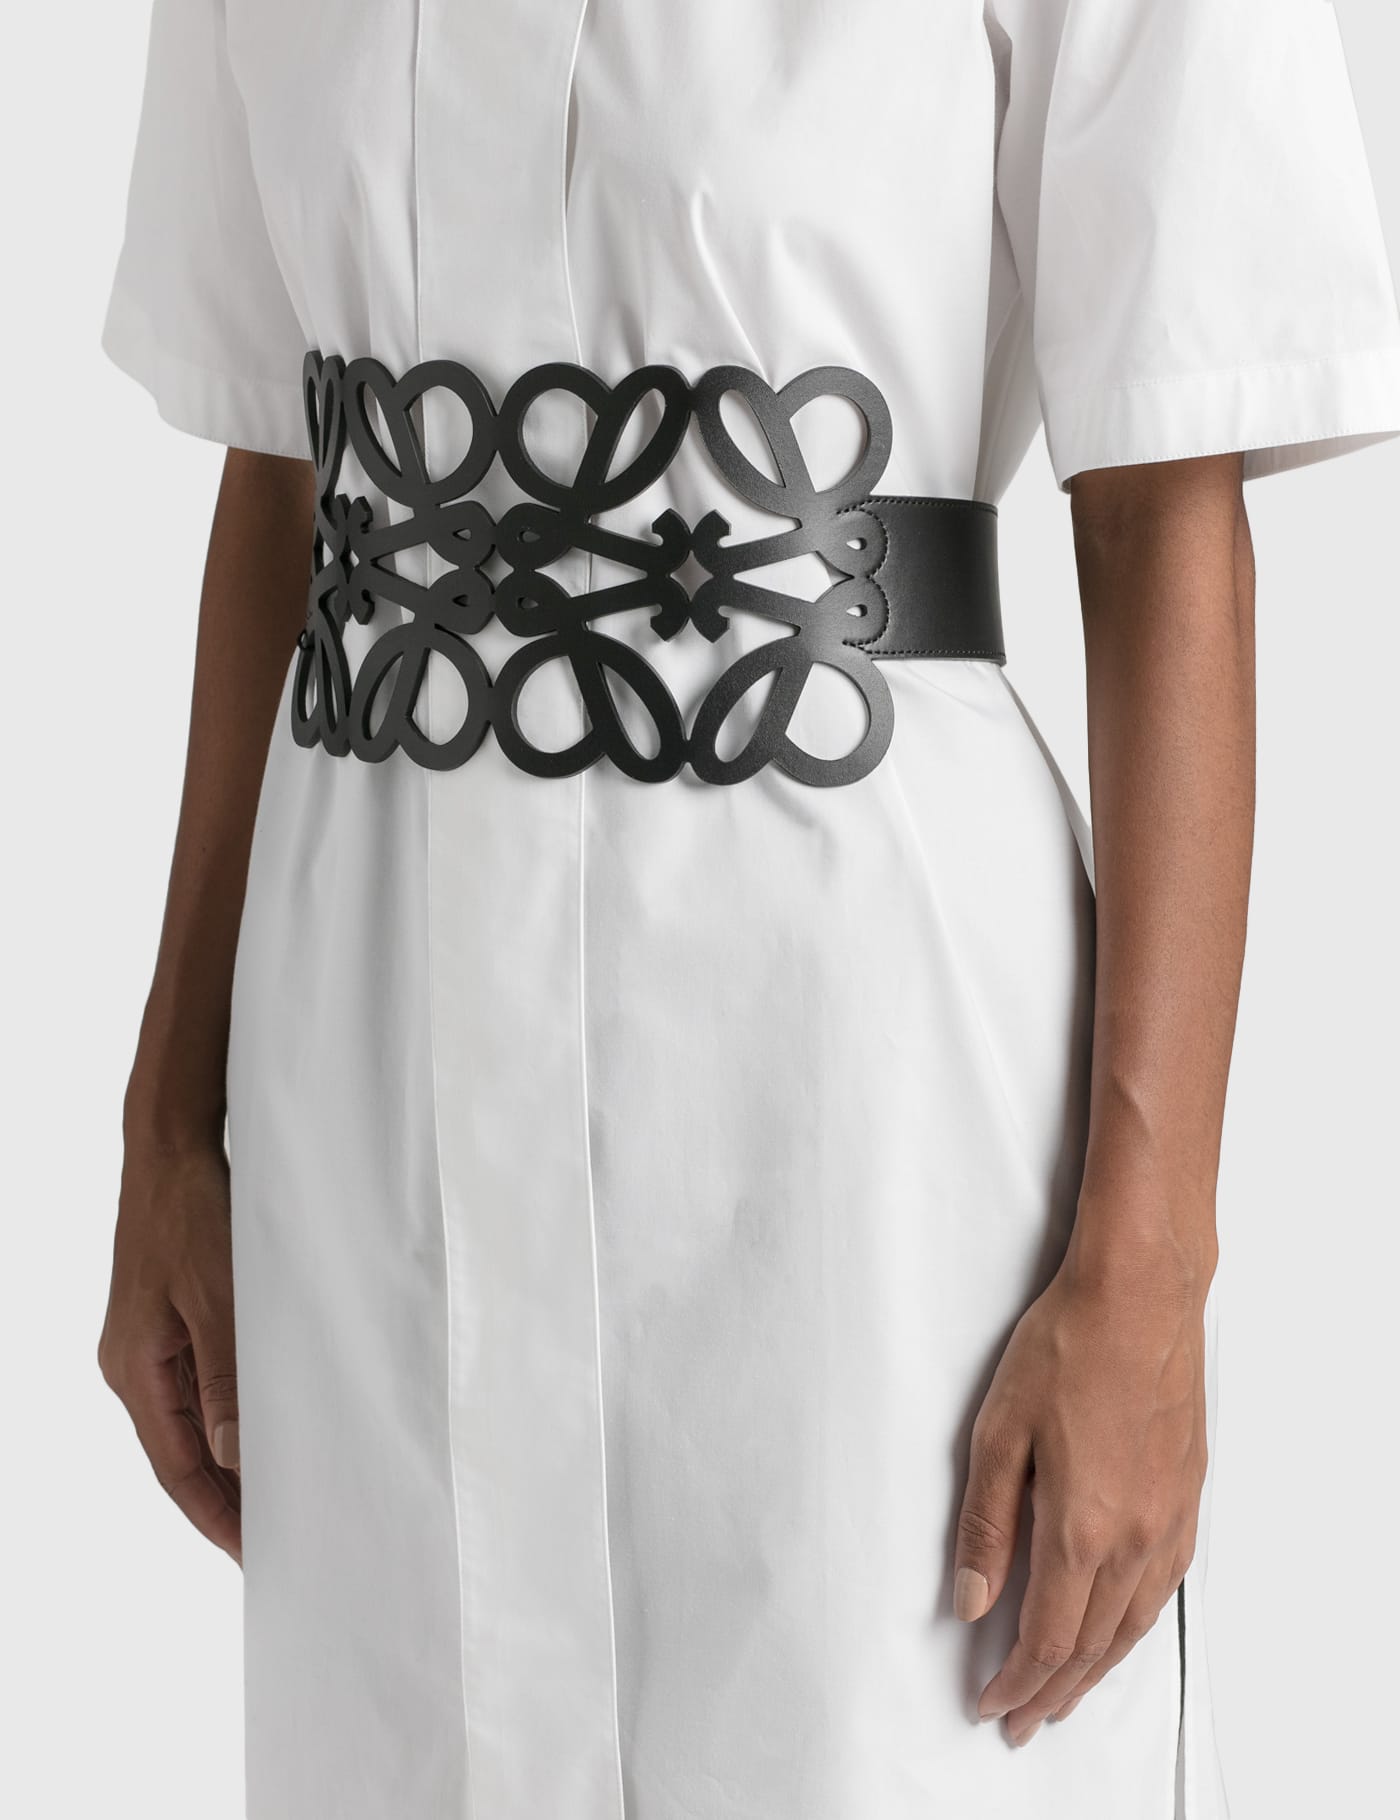 Loewe - Anagram Cutout Belt | HBX - Globally Curated Fashion and Lifestyle  by Hypebeast